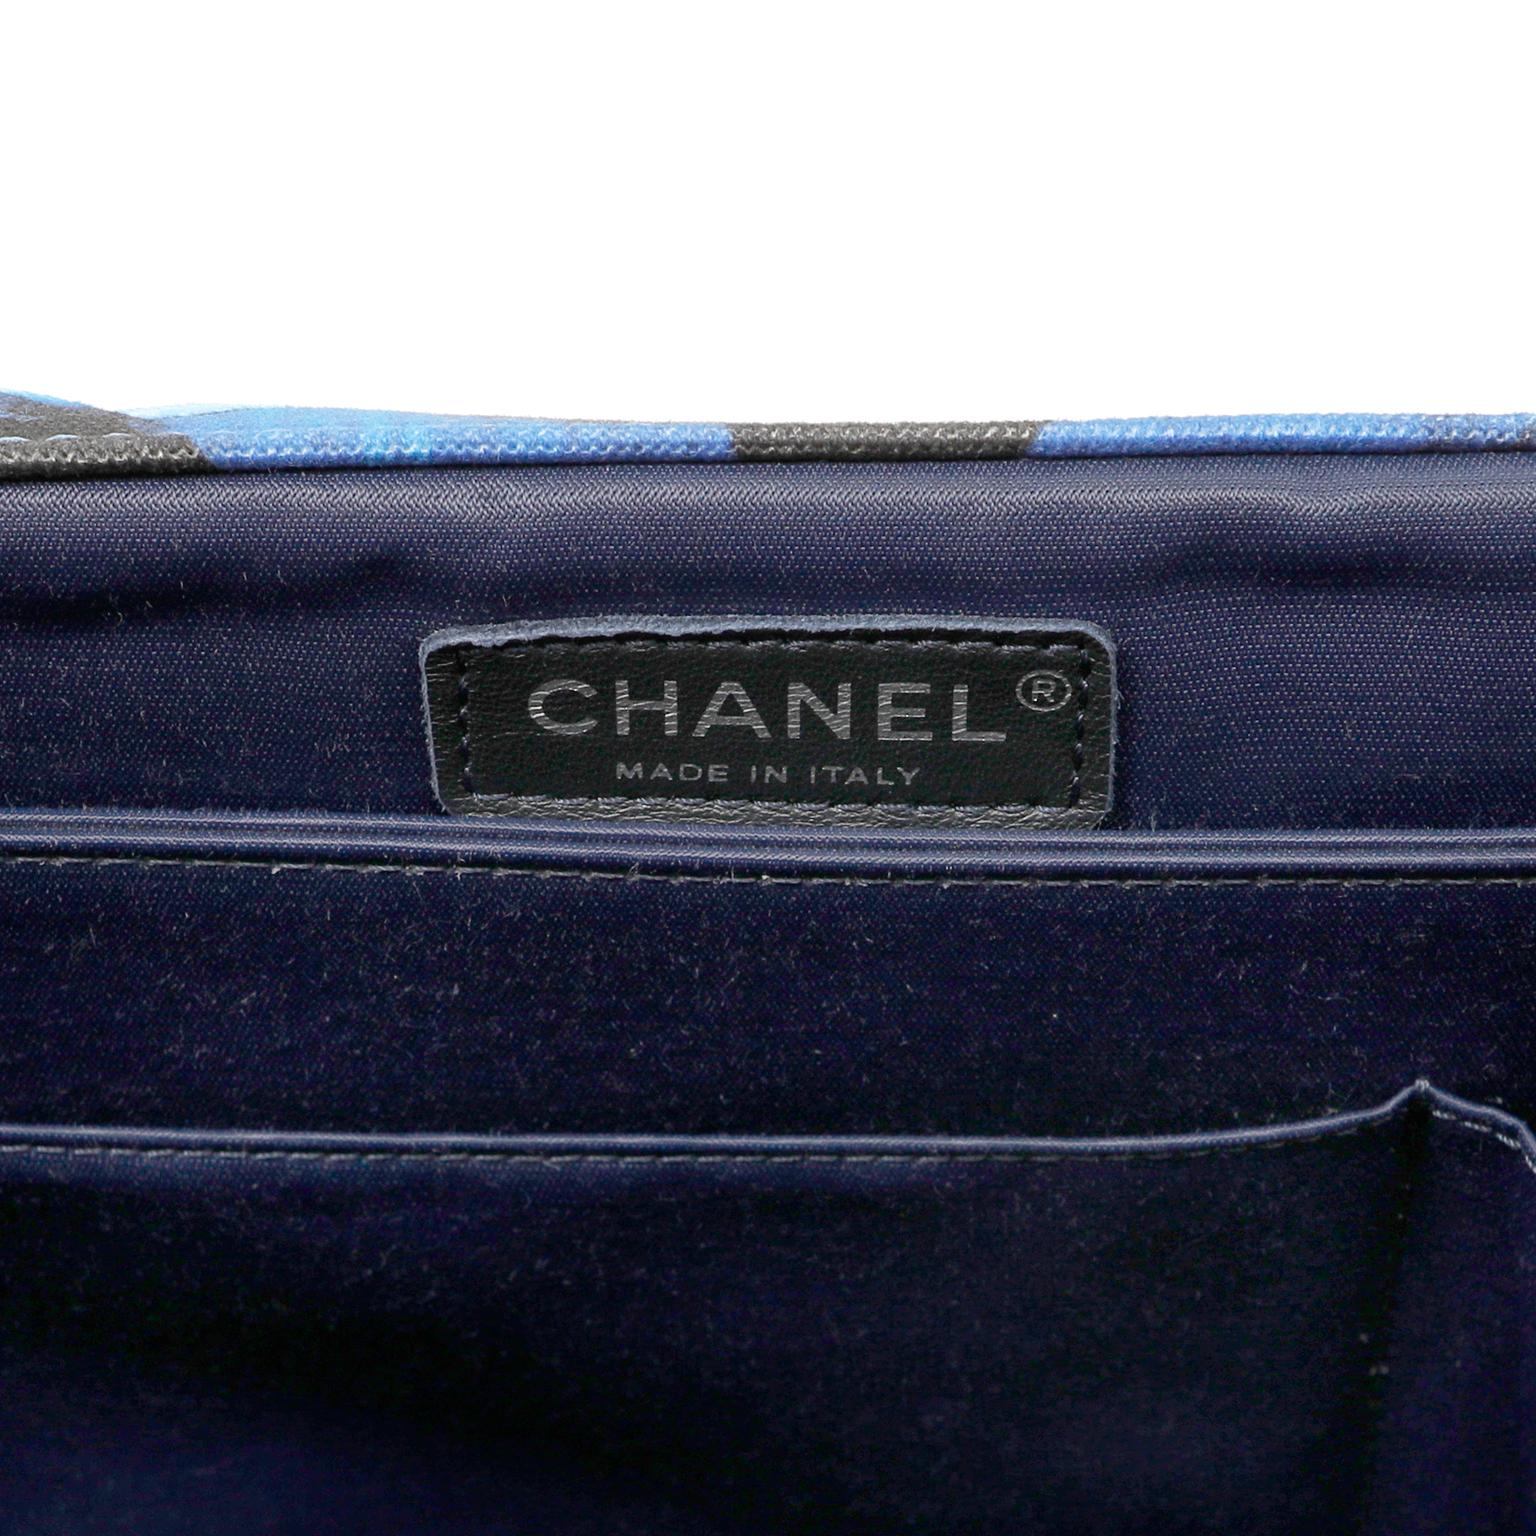 Chanel Plaid Airline Travel Canvas Flap Bag In Good Condition For Sale In Palm Beach, FL